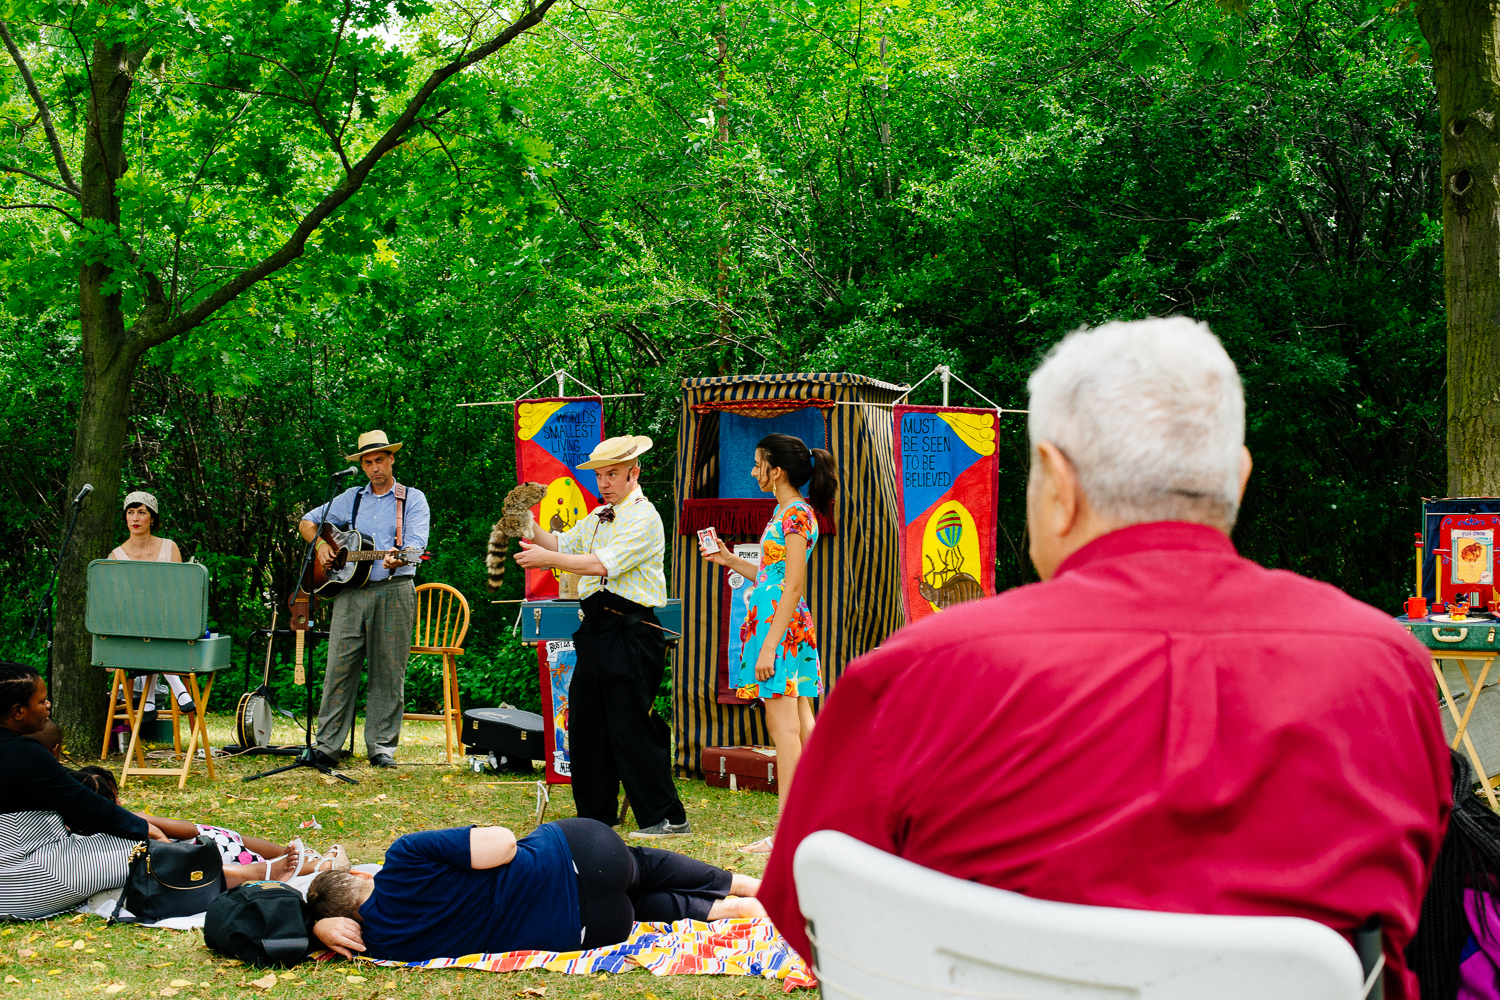 An elderly gentleman is seated and watches performers from a distance.